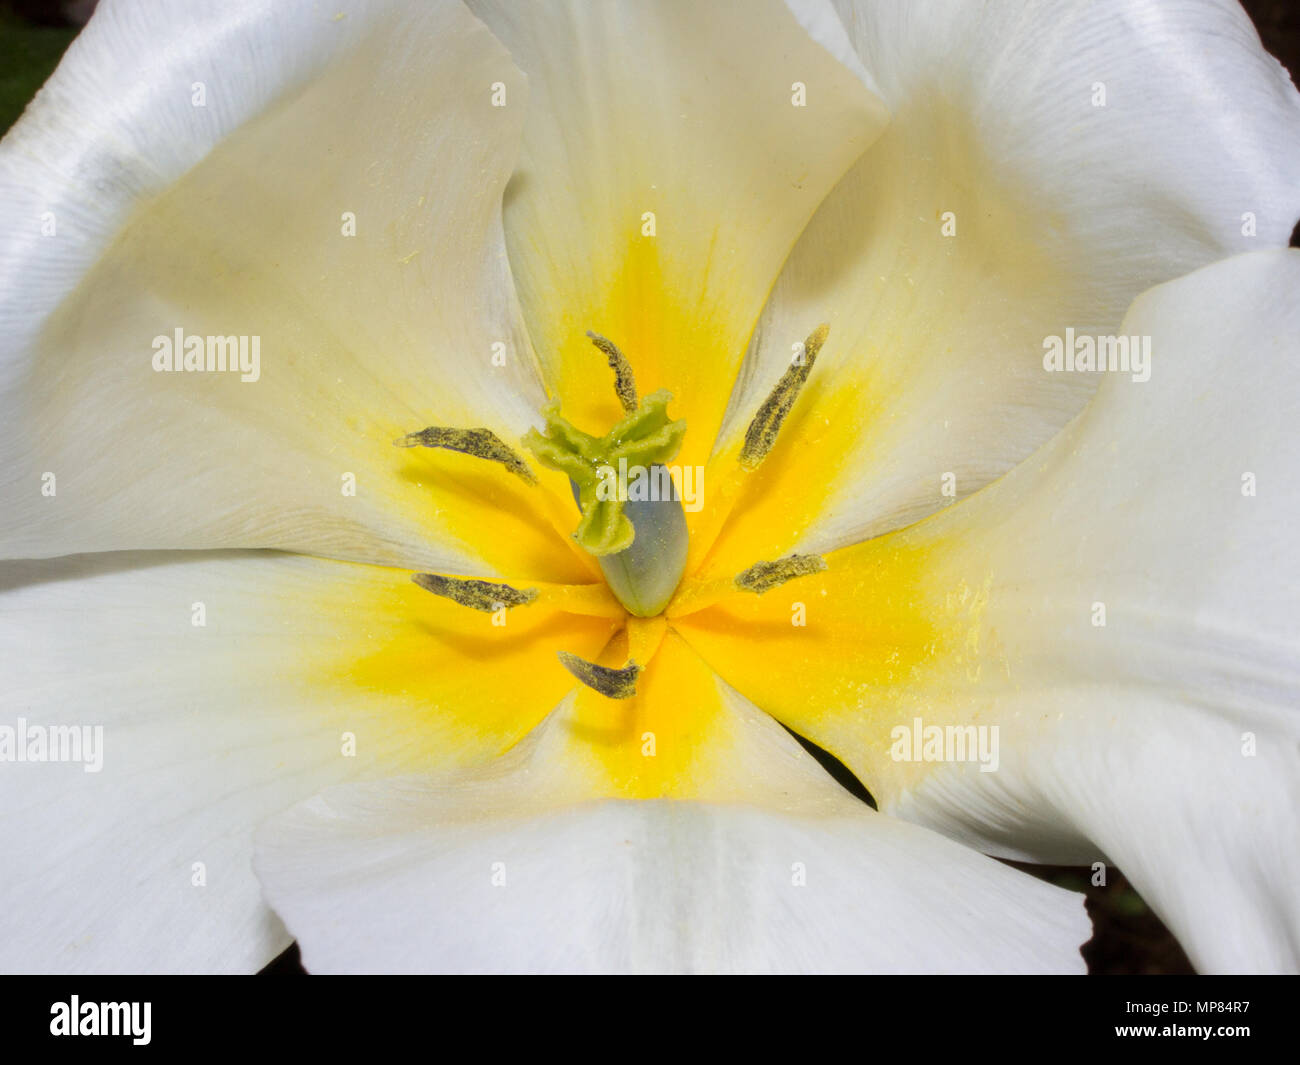 Yellow and white flower showing flower parts. Stock Photo